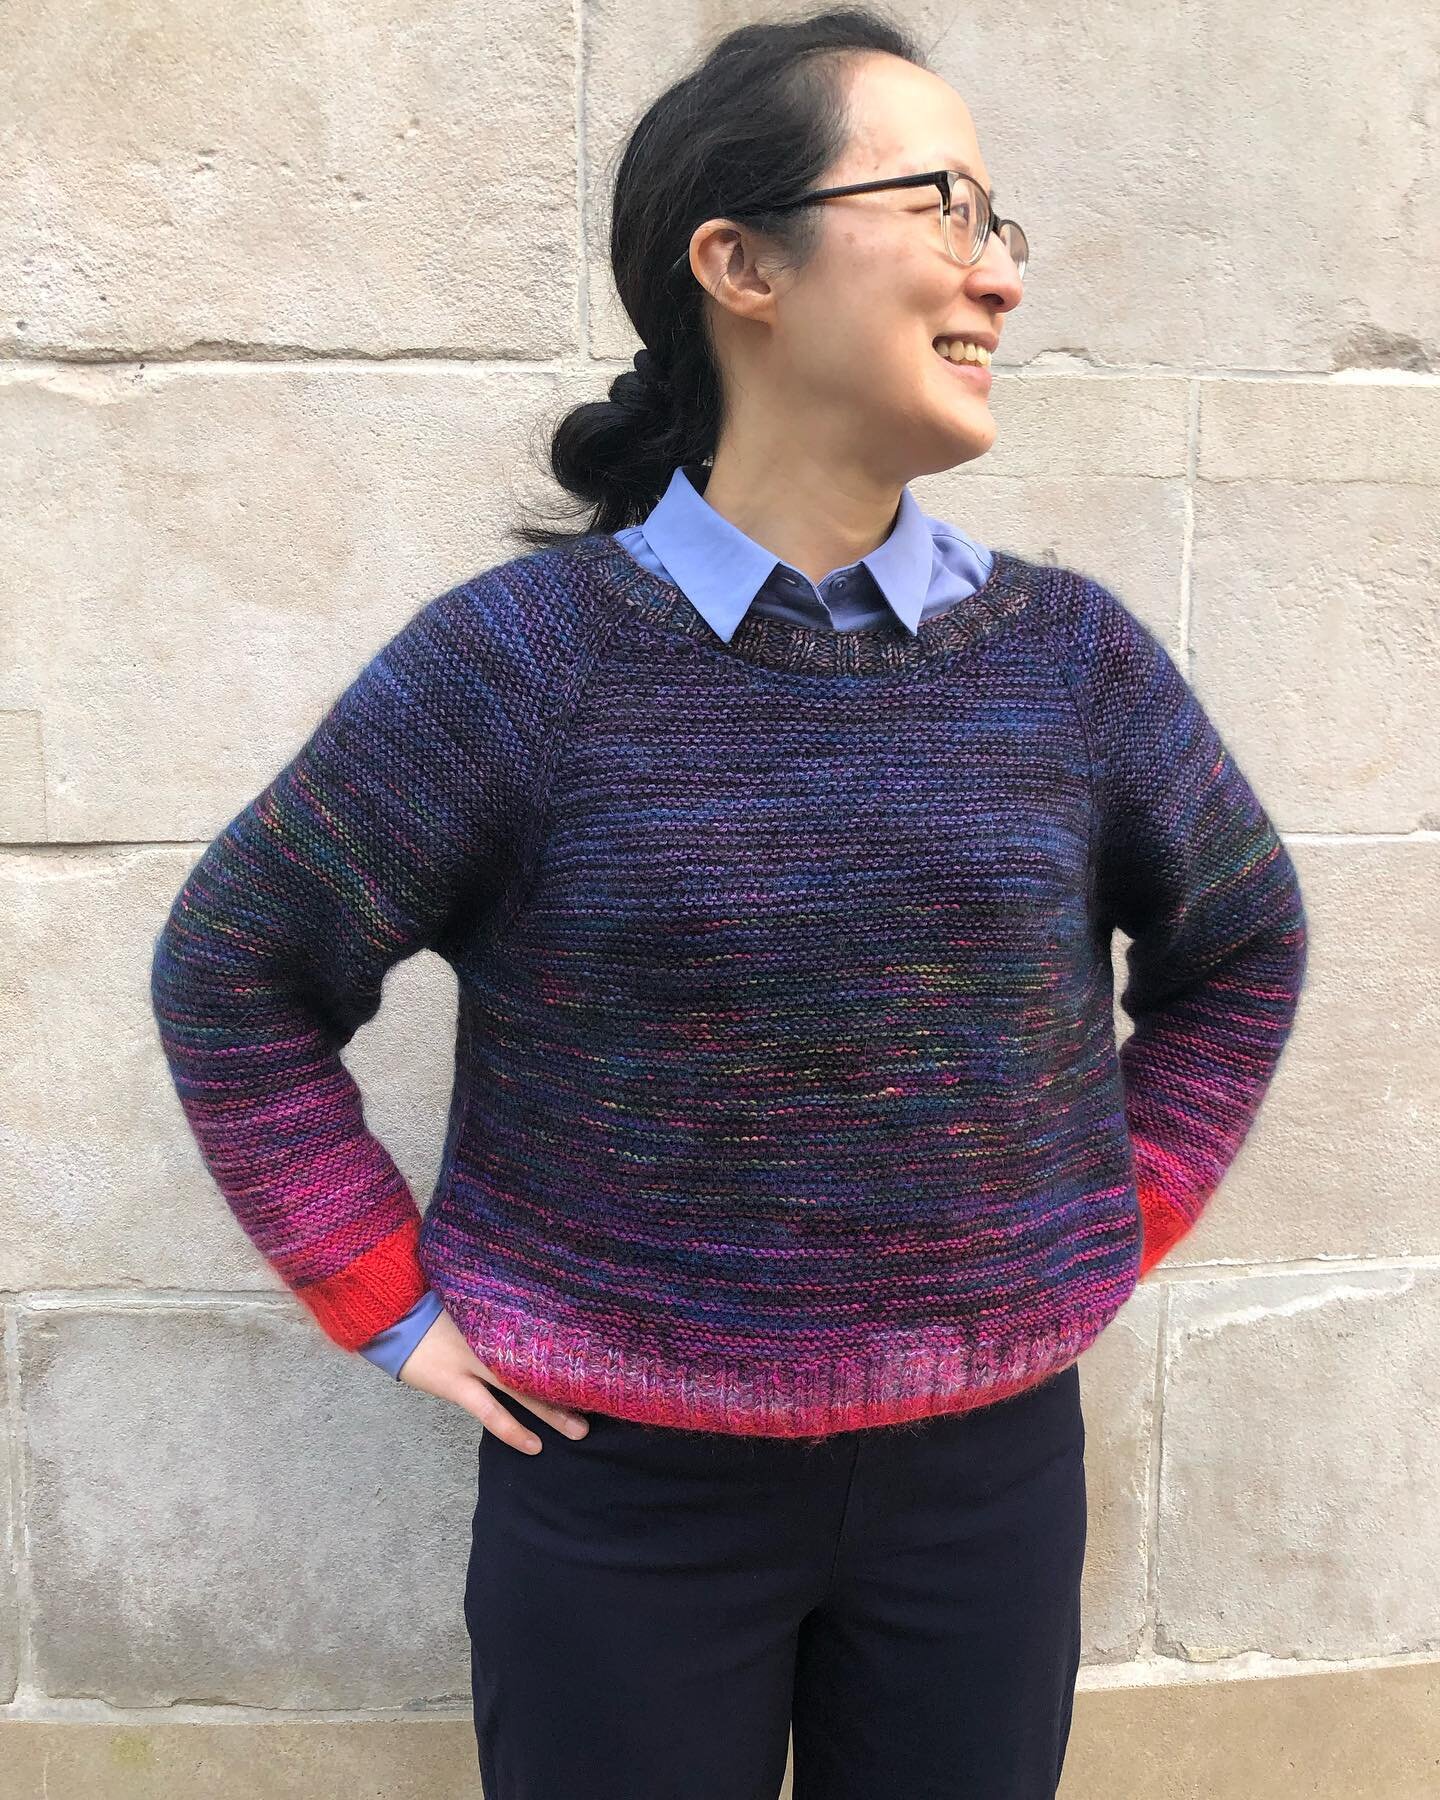 I made this sweater in the summer and I wear it all the time now. I love fading from one color to another while knitting, because I can use up partial skeins of yarn from my stash to make something unique. 

Pattern: Grainne from Ready Set Raglan
Yar